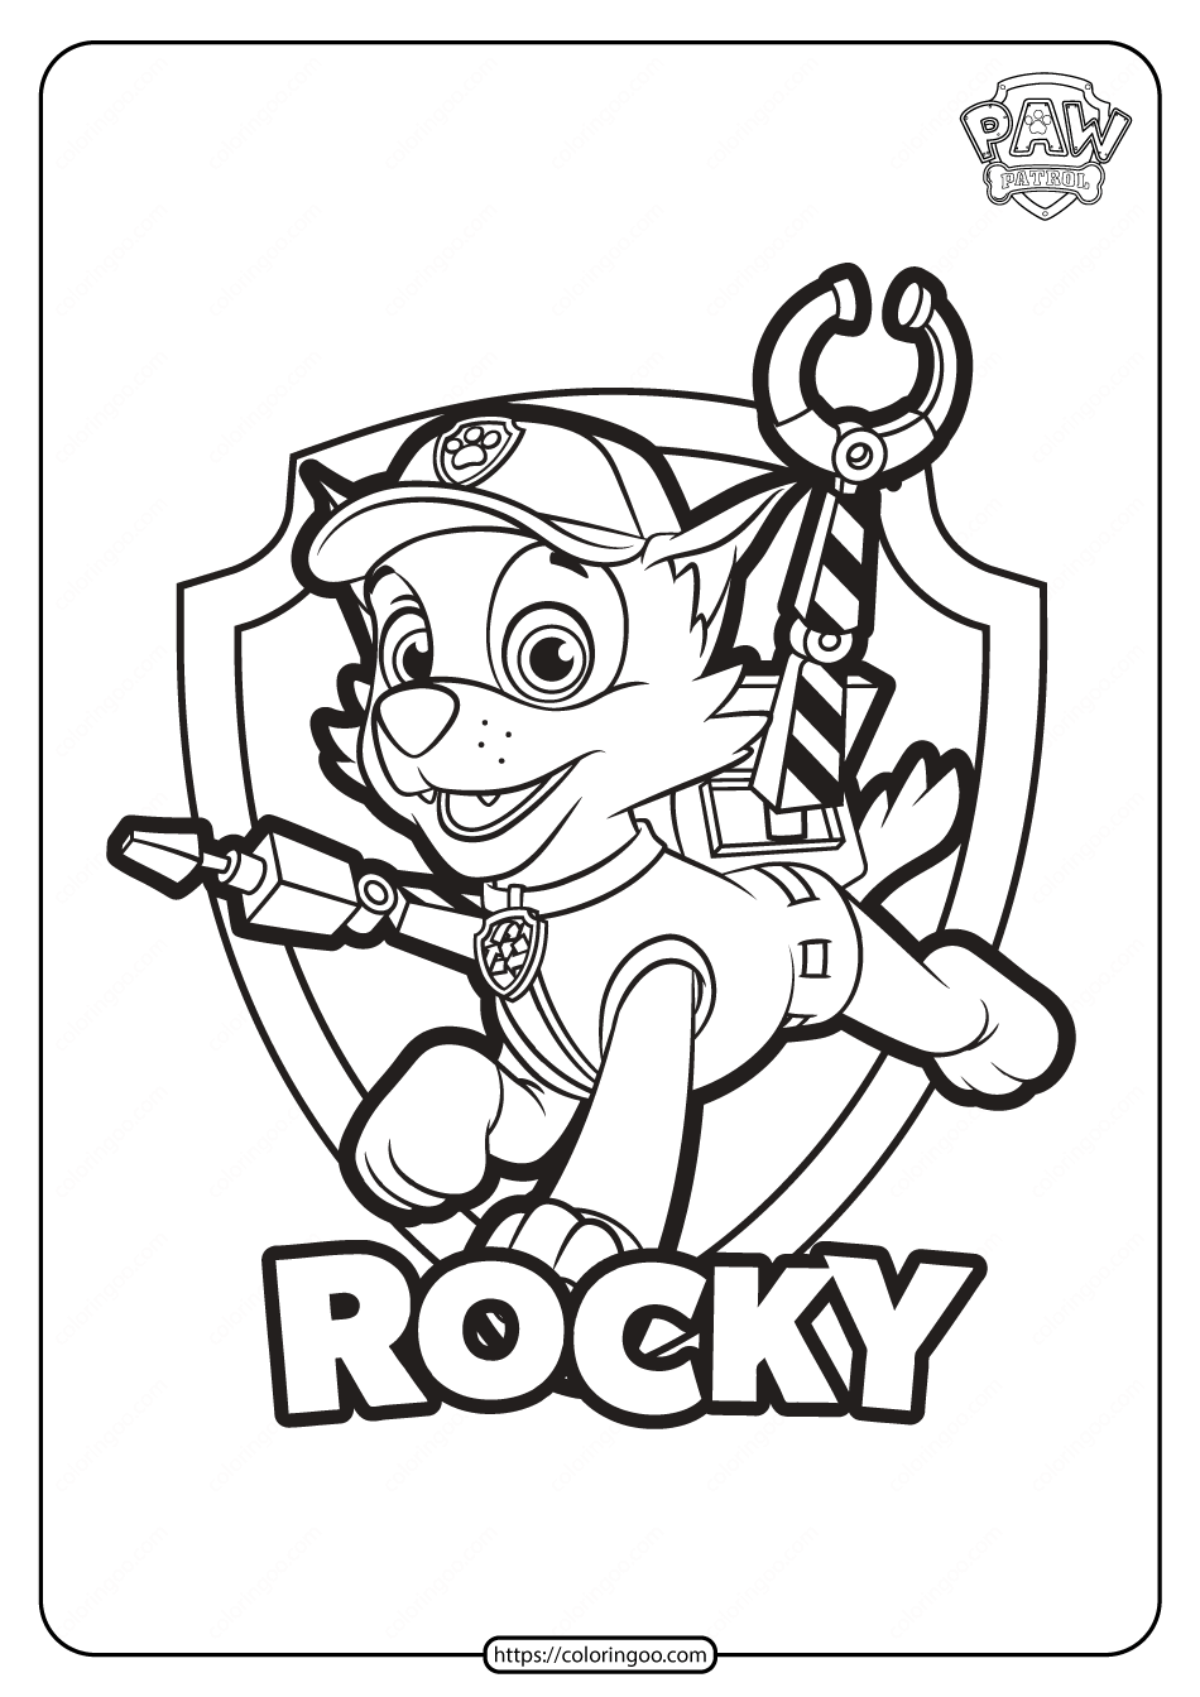 Rocky Paw Patrol Coloring Pages Coloring Home